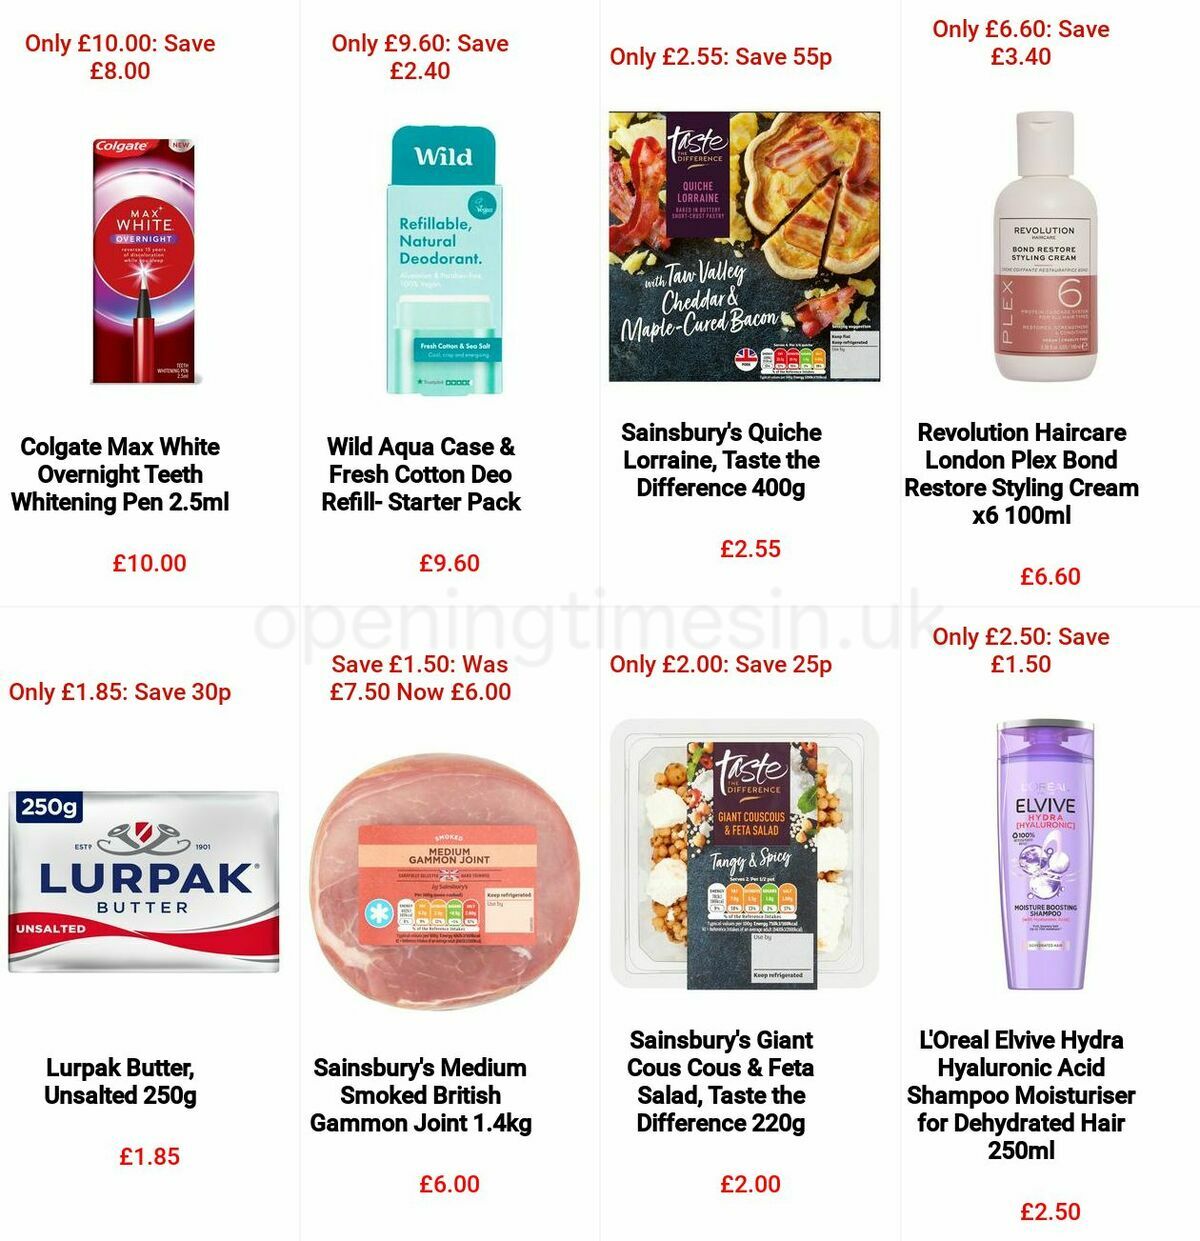 Sainsbury's Offers from 1 April